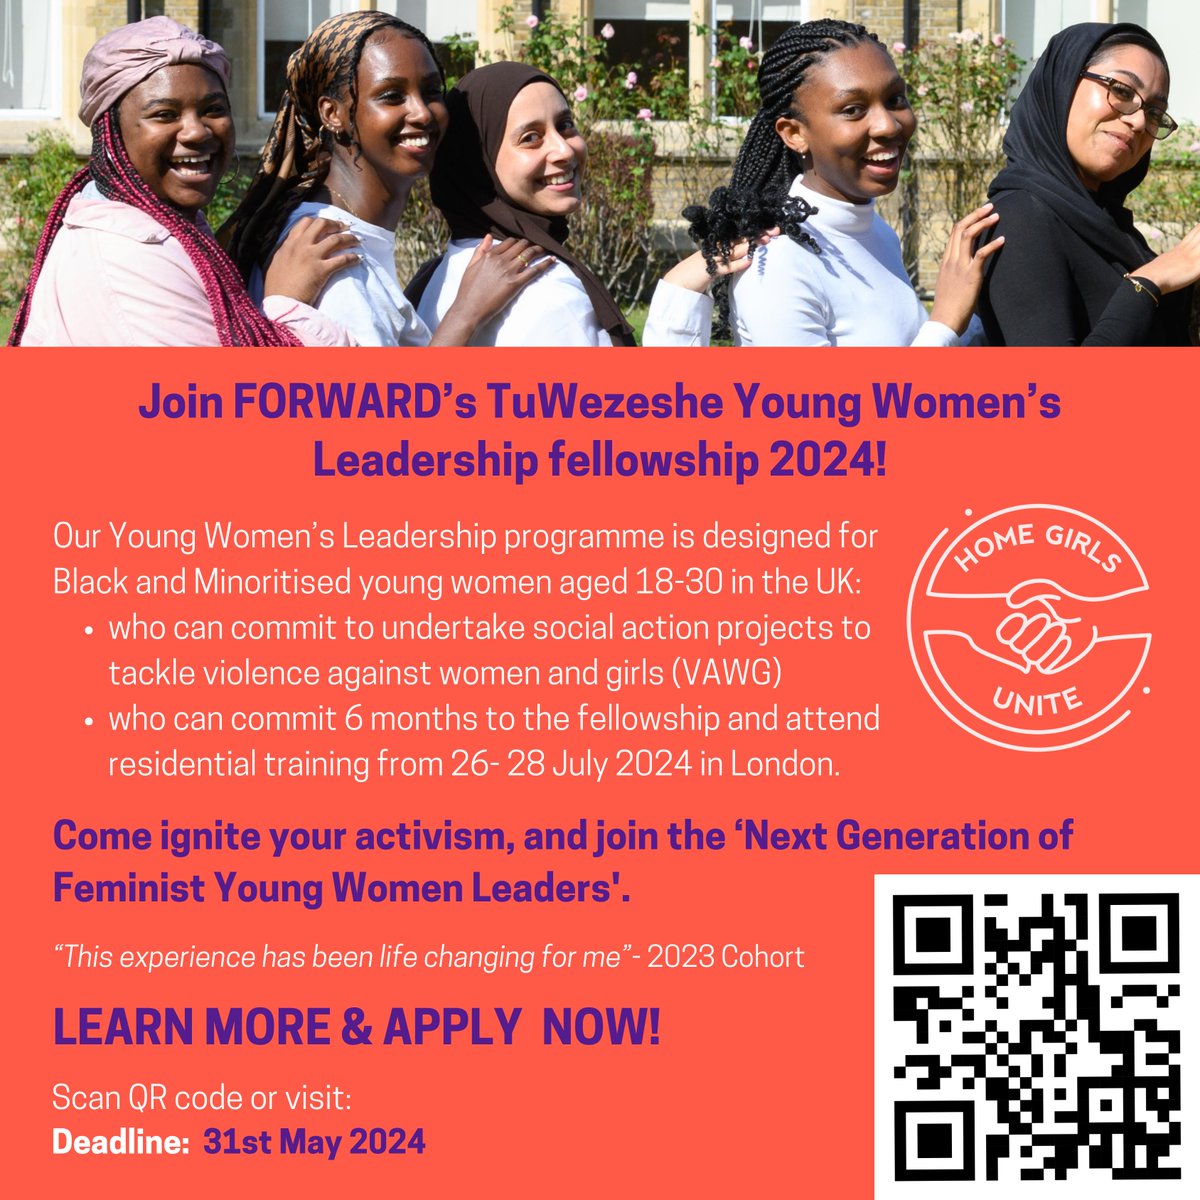 Heads up! 🚨 We're now accepting applications for our TuWezeshe young women's programme! 💜 If you're Interested in learning how to shape the agenda on VAWG, network & voice yourself on both national & international platforms, apply today: bit.ly/43zUnOj